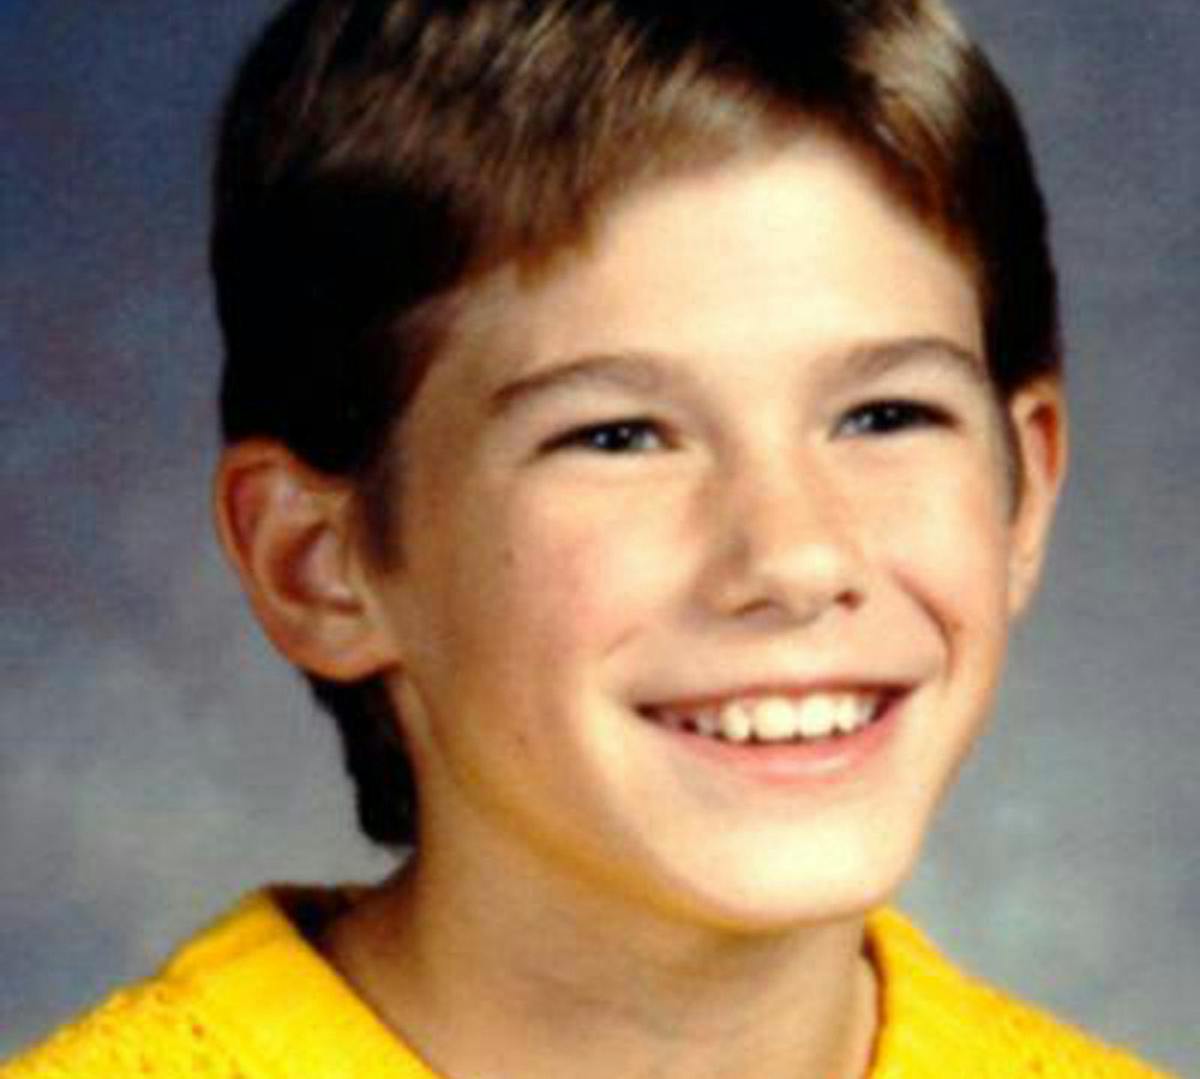 Jacob Wetterling, close to the age of his abduction.